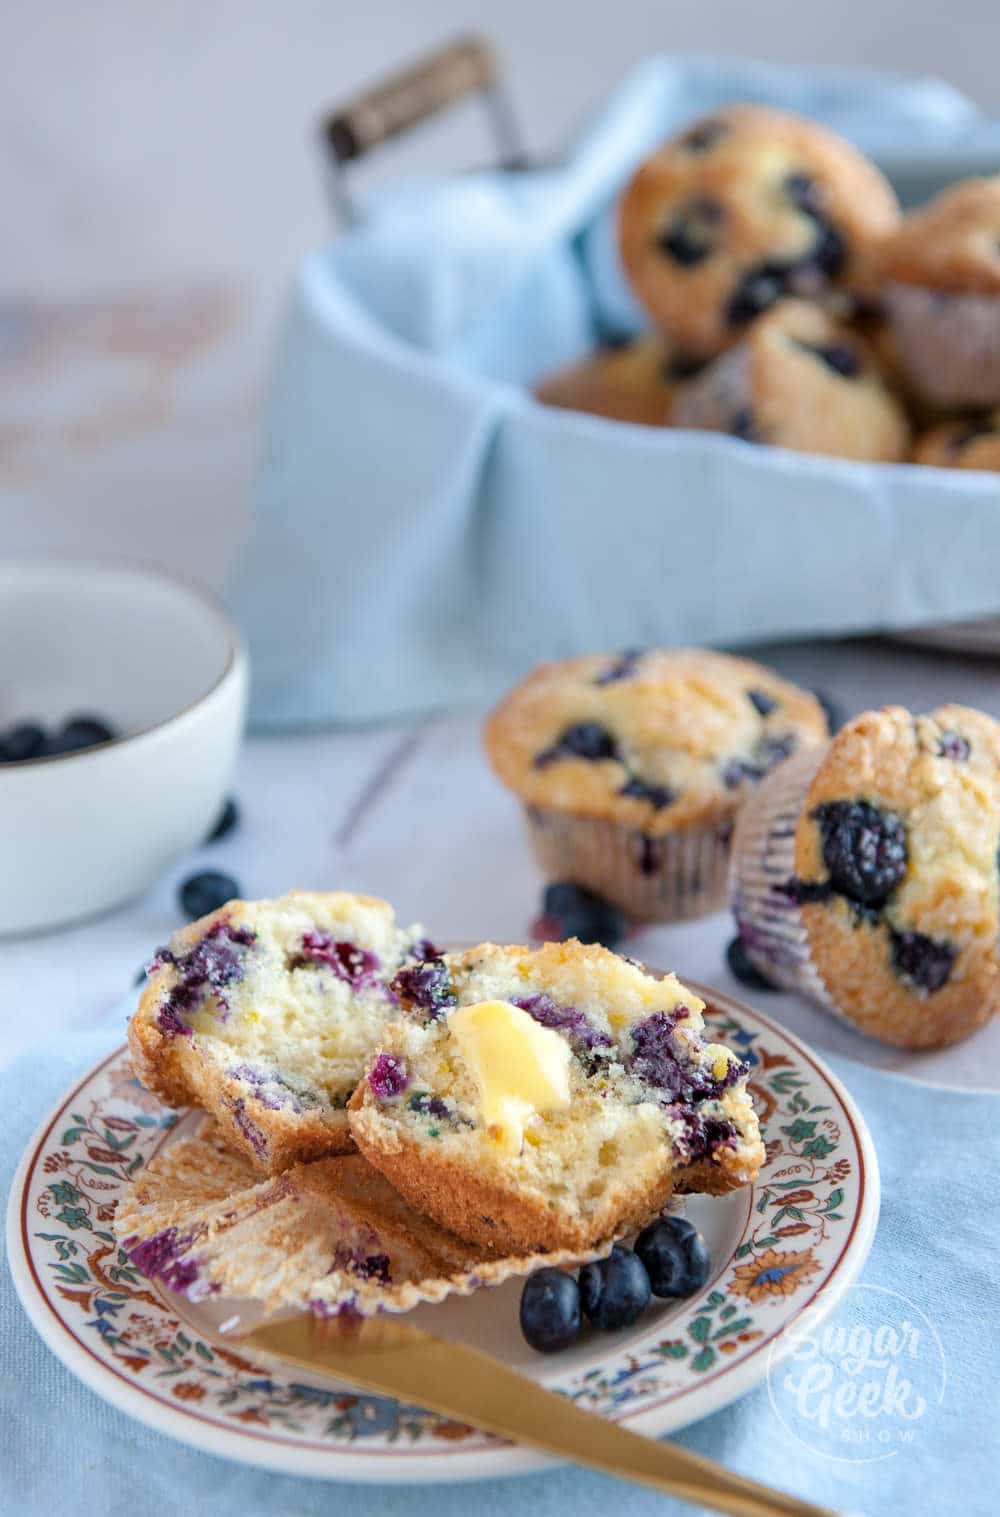 lemon blueberry muffin sliced open with melted butter. Sitting on plate with floral border and butter knife on the edge. Basket of muffins in the background.